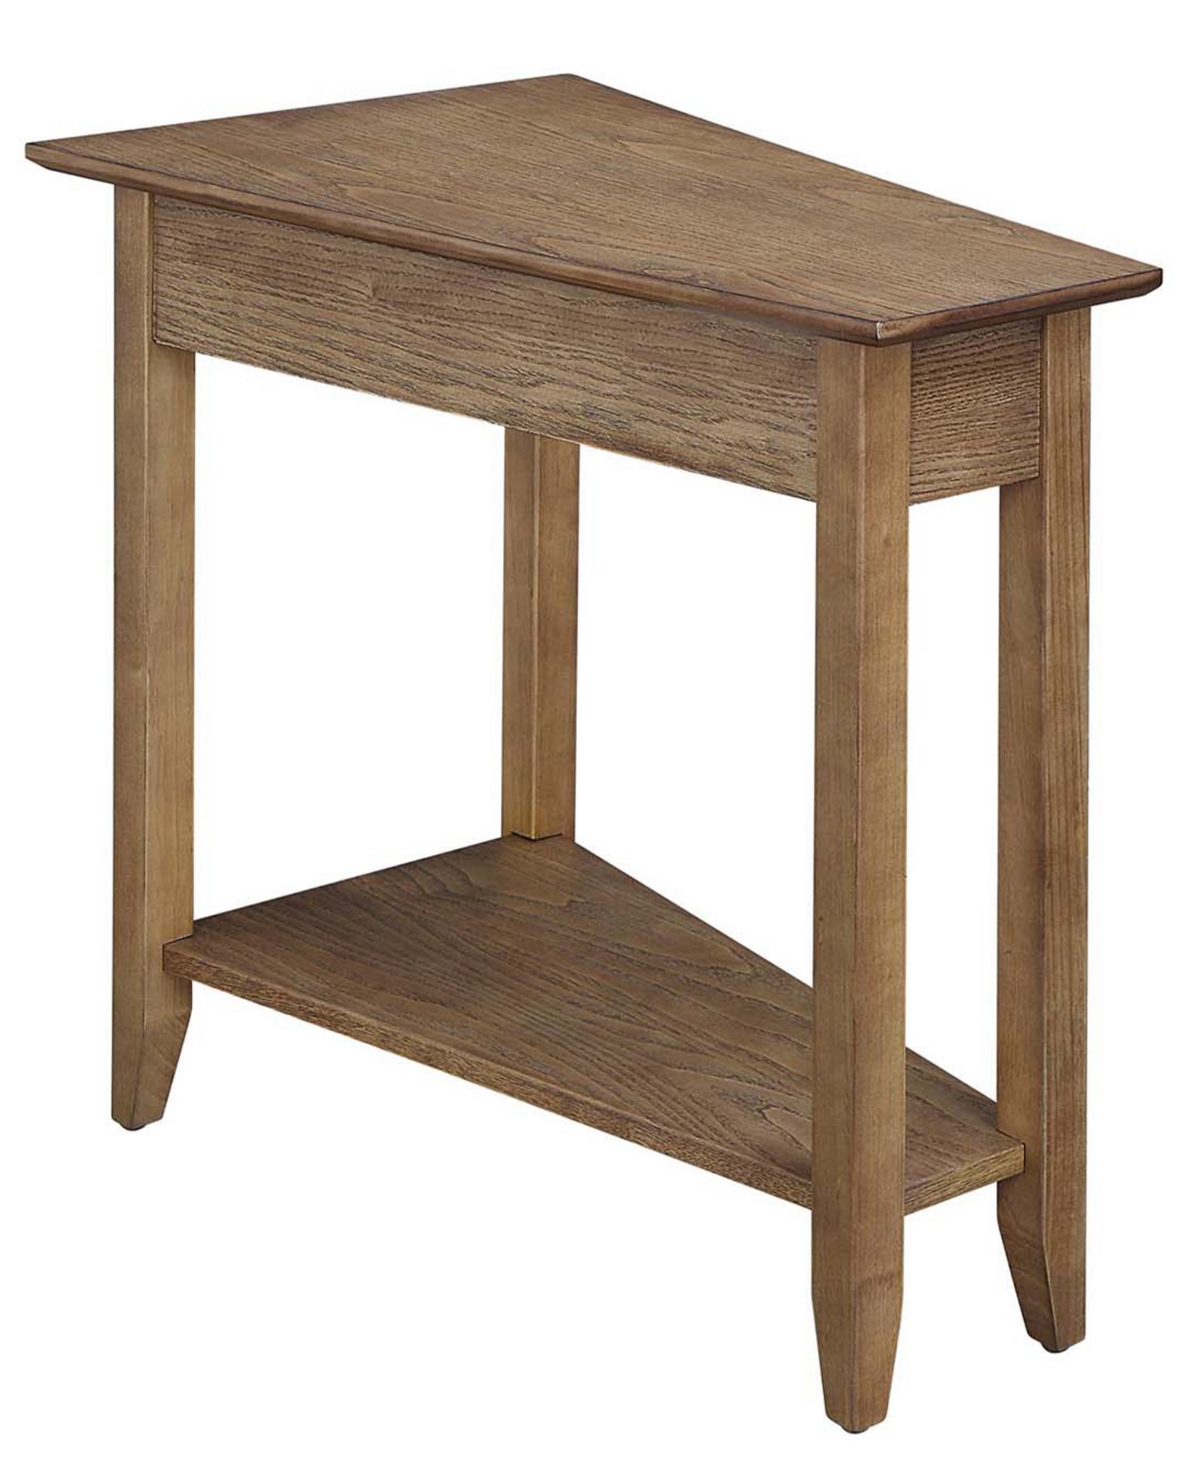 Convenience Concepts 24" Rubber Wood Ah Wedge End Table With Shelf In Driftwood